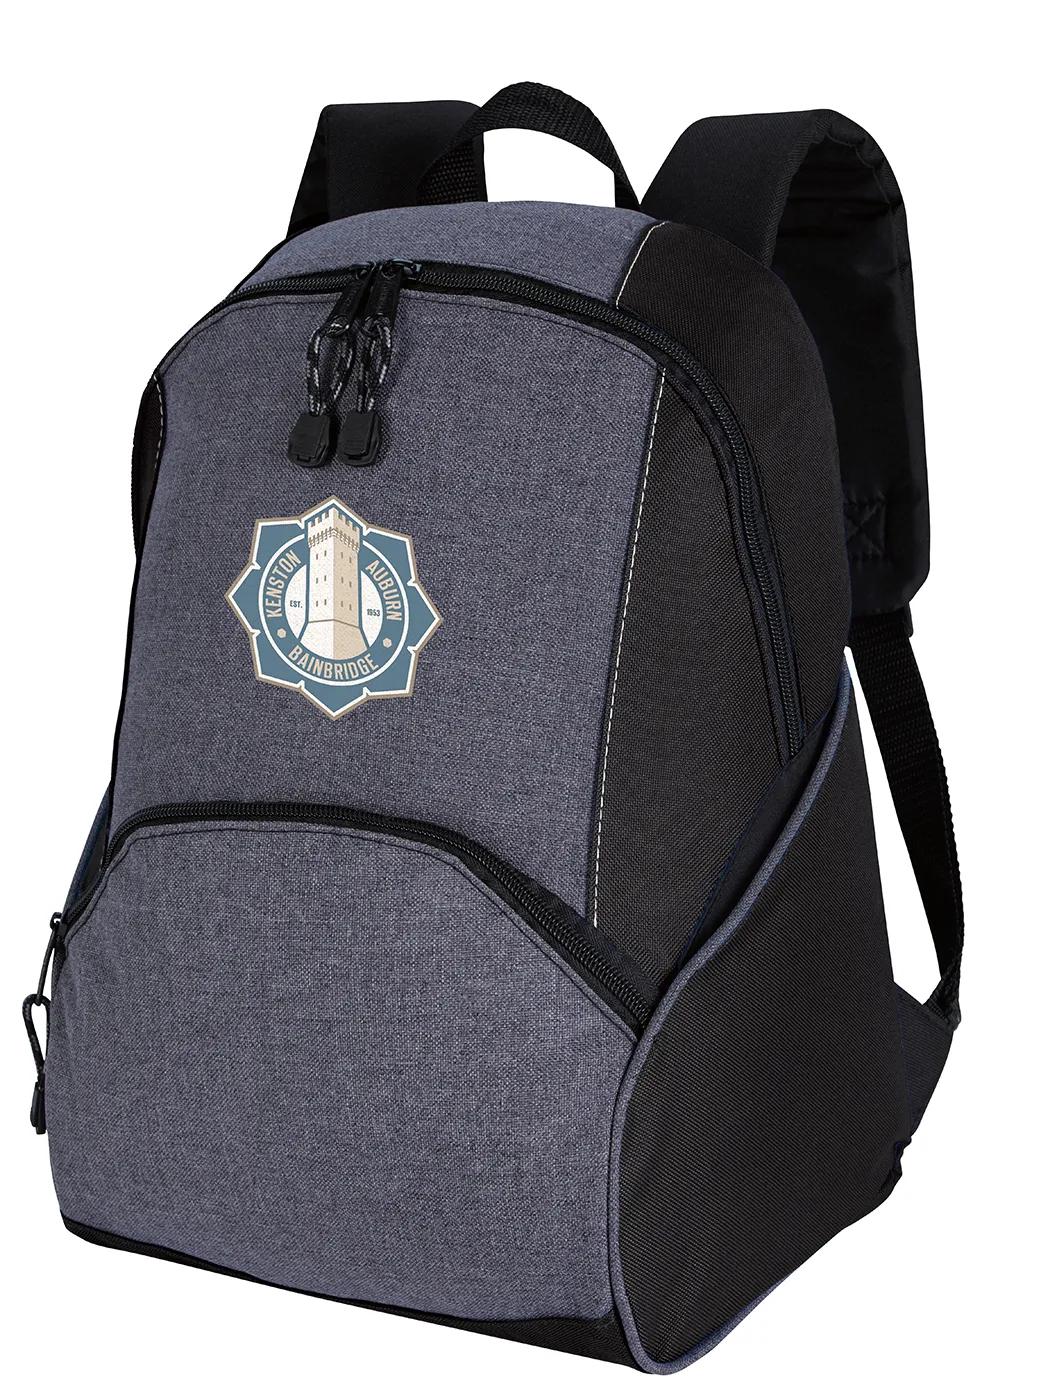 Two-Tone On the Move Backpack 1 of 25